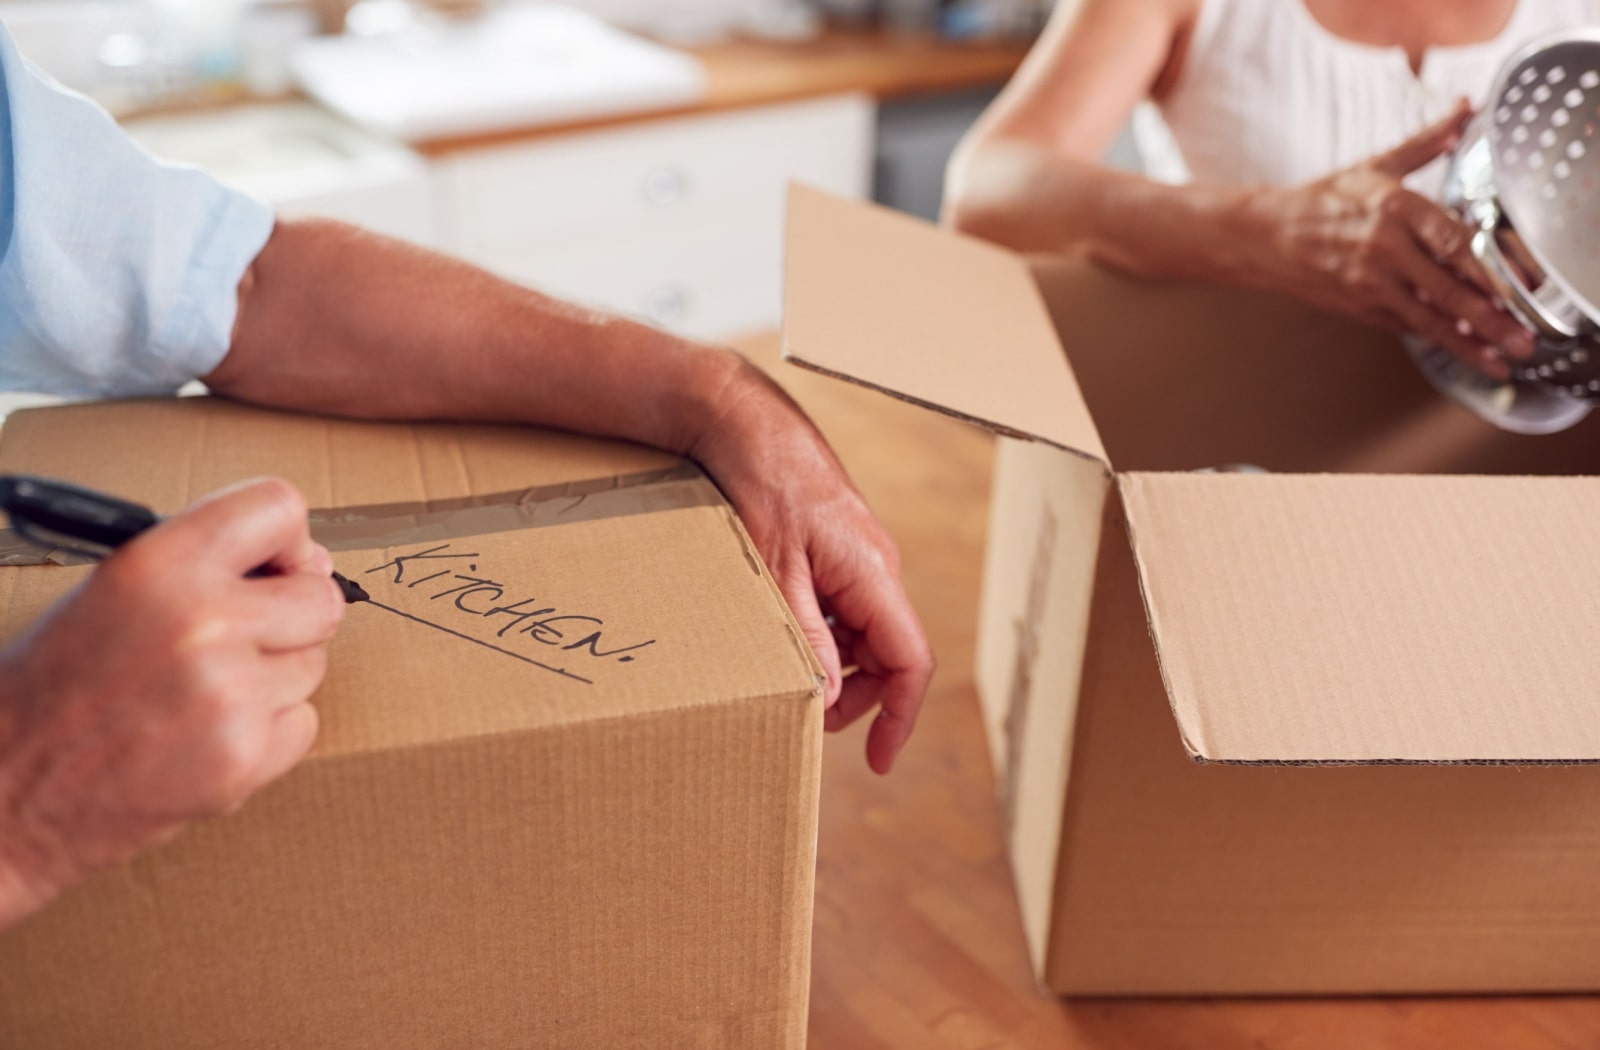 A senior couple packing boxes with kitchen items in them